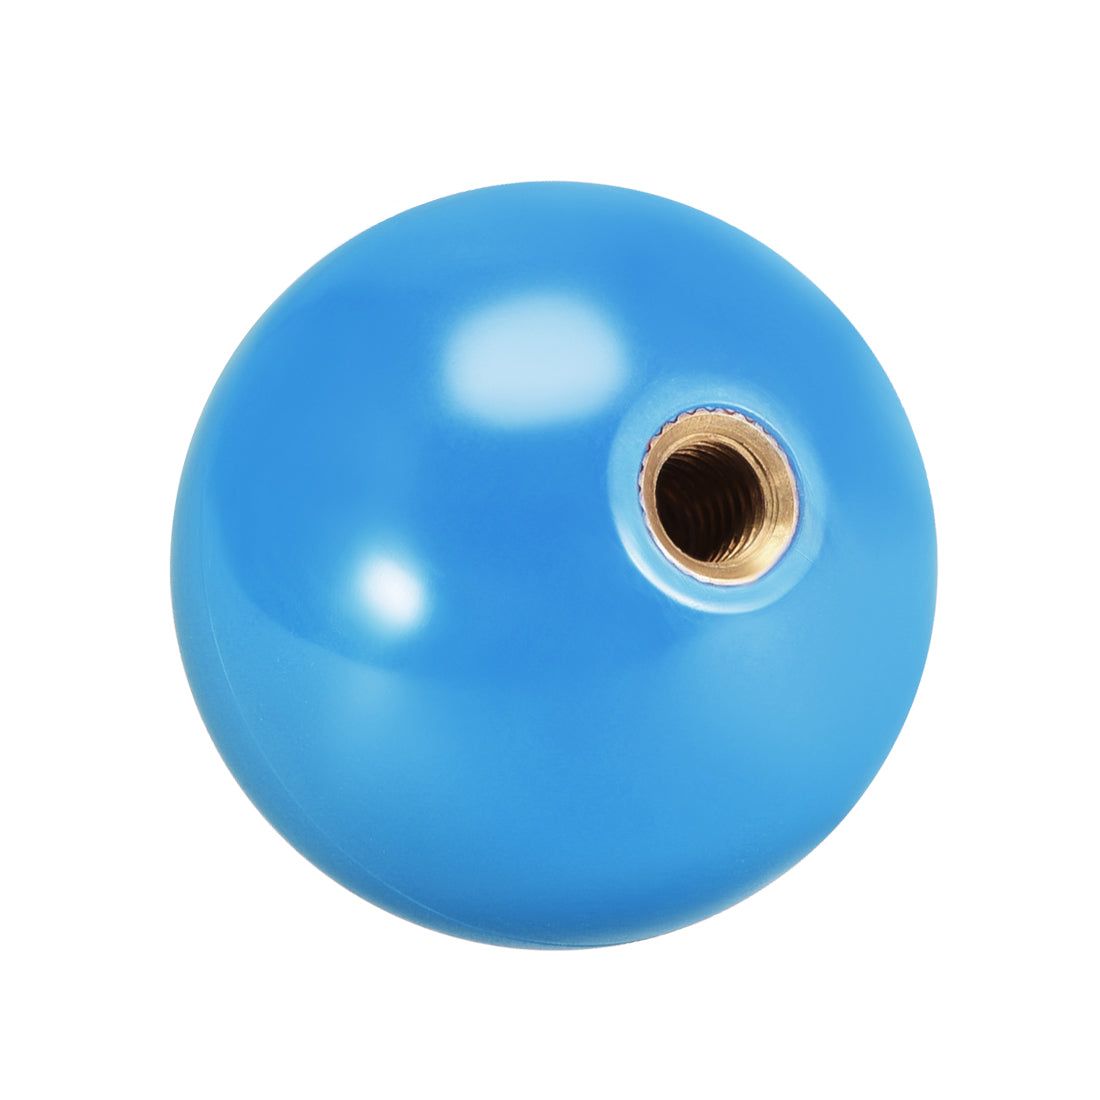 uxcell Uxcell Joystick Ball Top Handle Rocker Round Head Arcade Fighting Game DIY Parts Replacement Blue